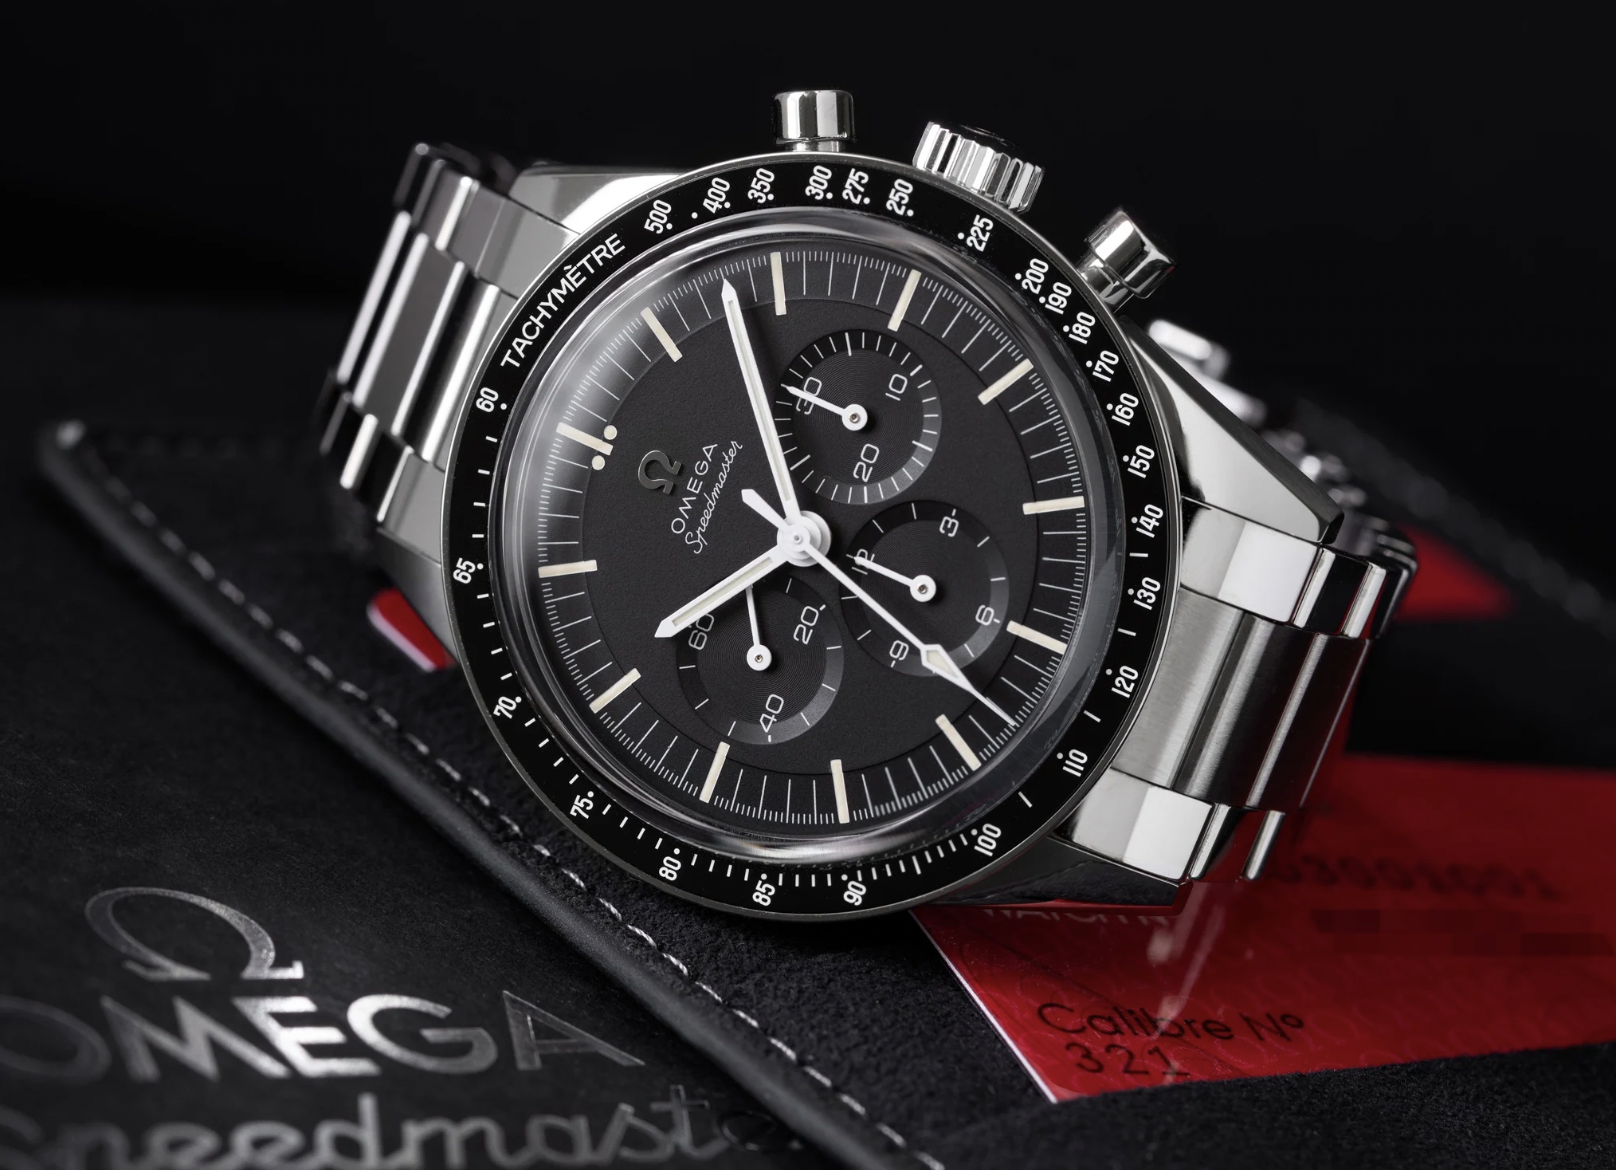 Things You Need to Know Before Buying an Omega Speedmaster